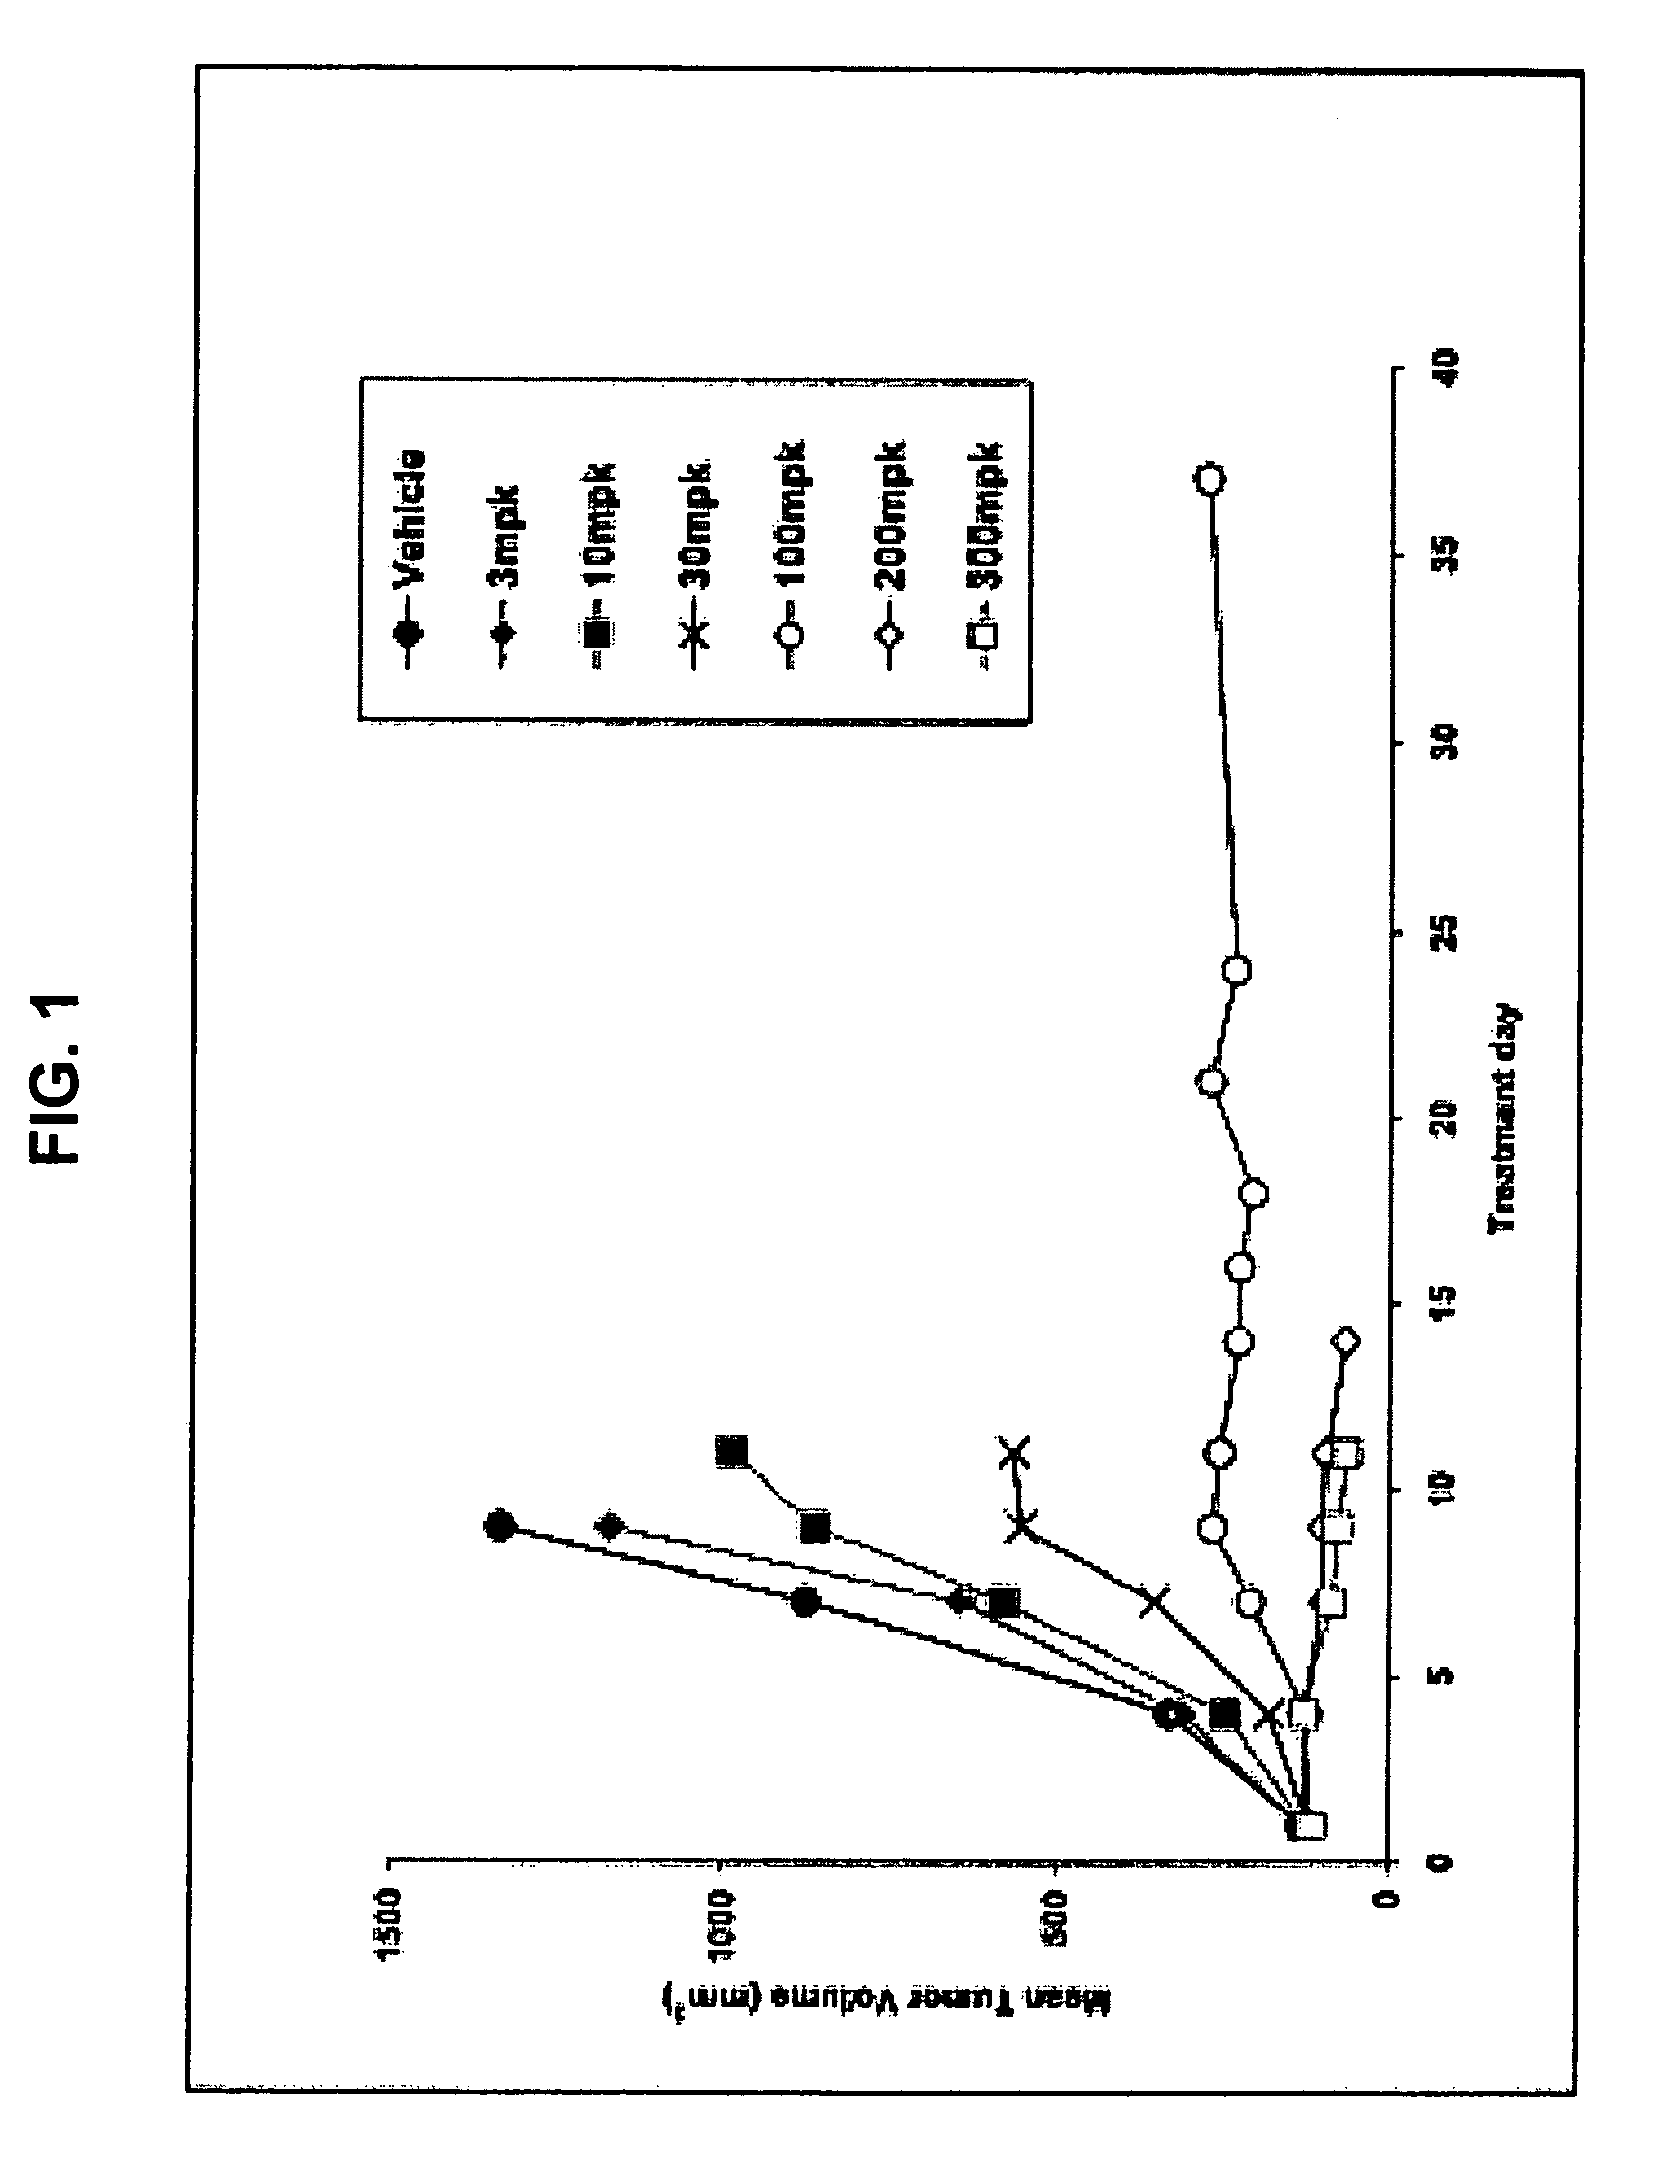 Methods of treating cancer and related methods